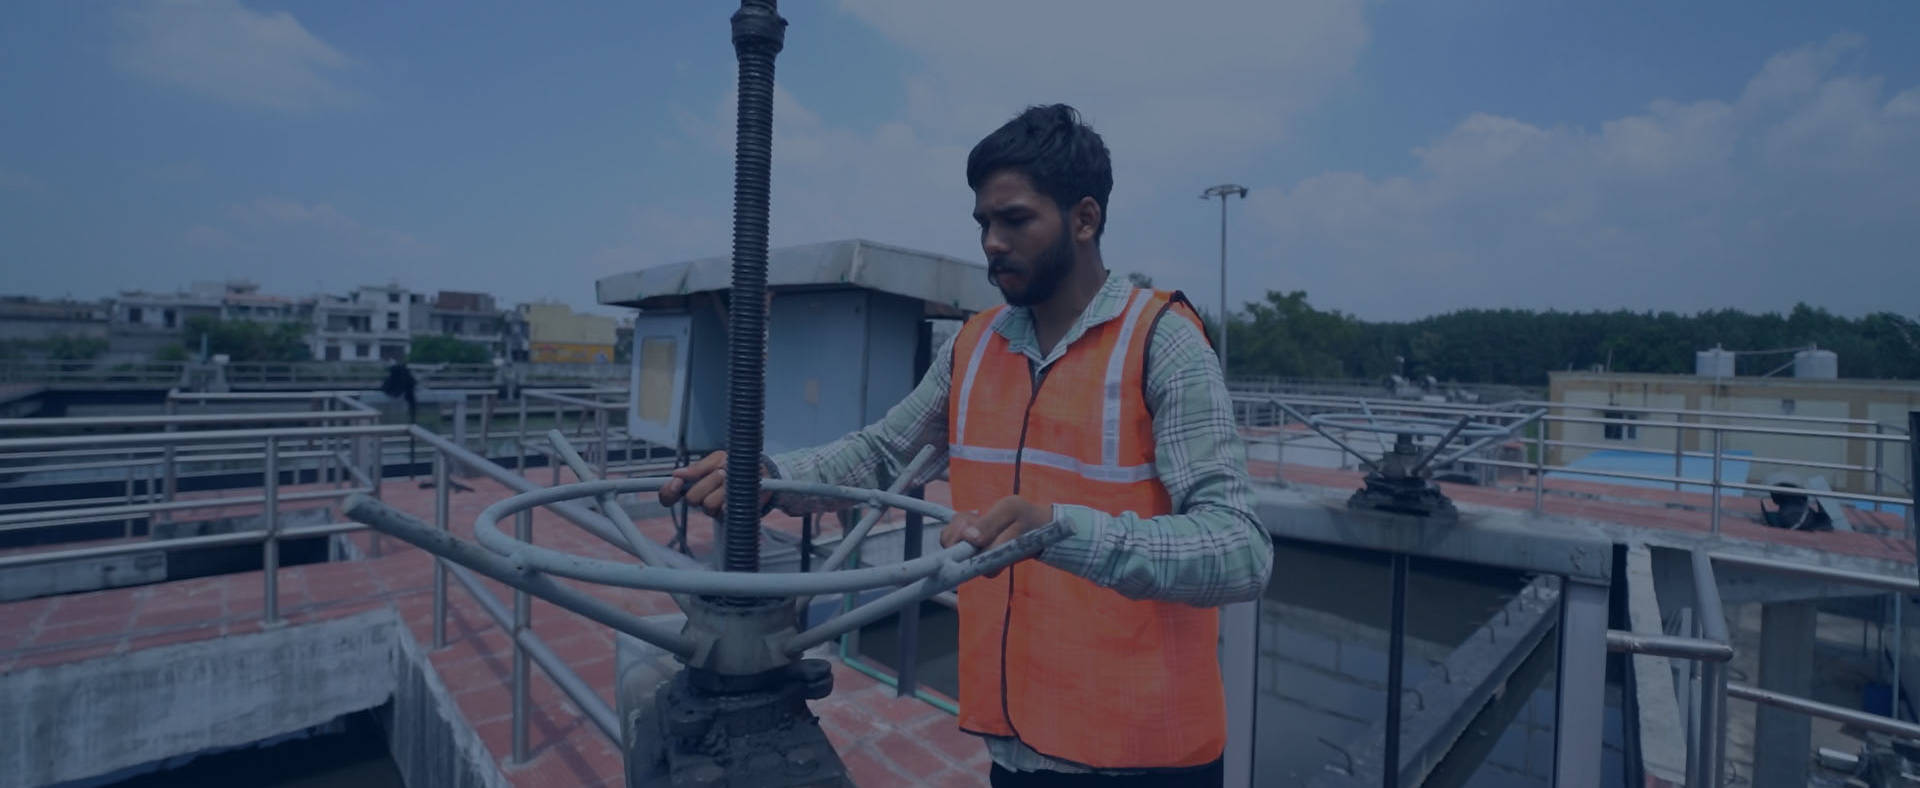 Premier Tech Water and Environment technician performing operations tasks at an SBR wastewater treatment plant in India.